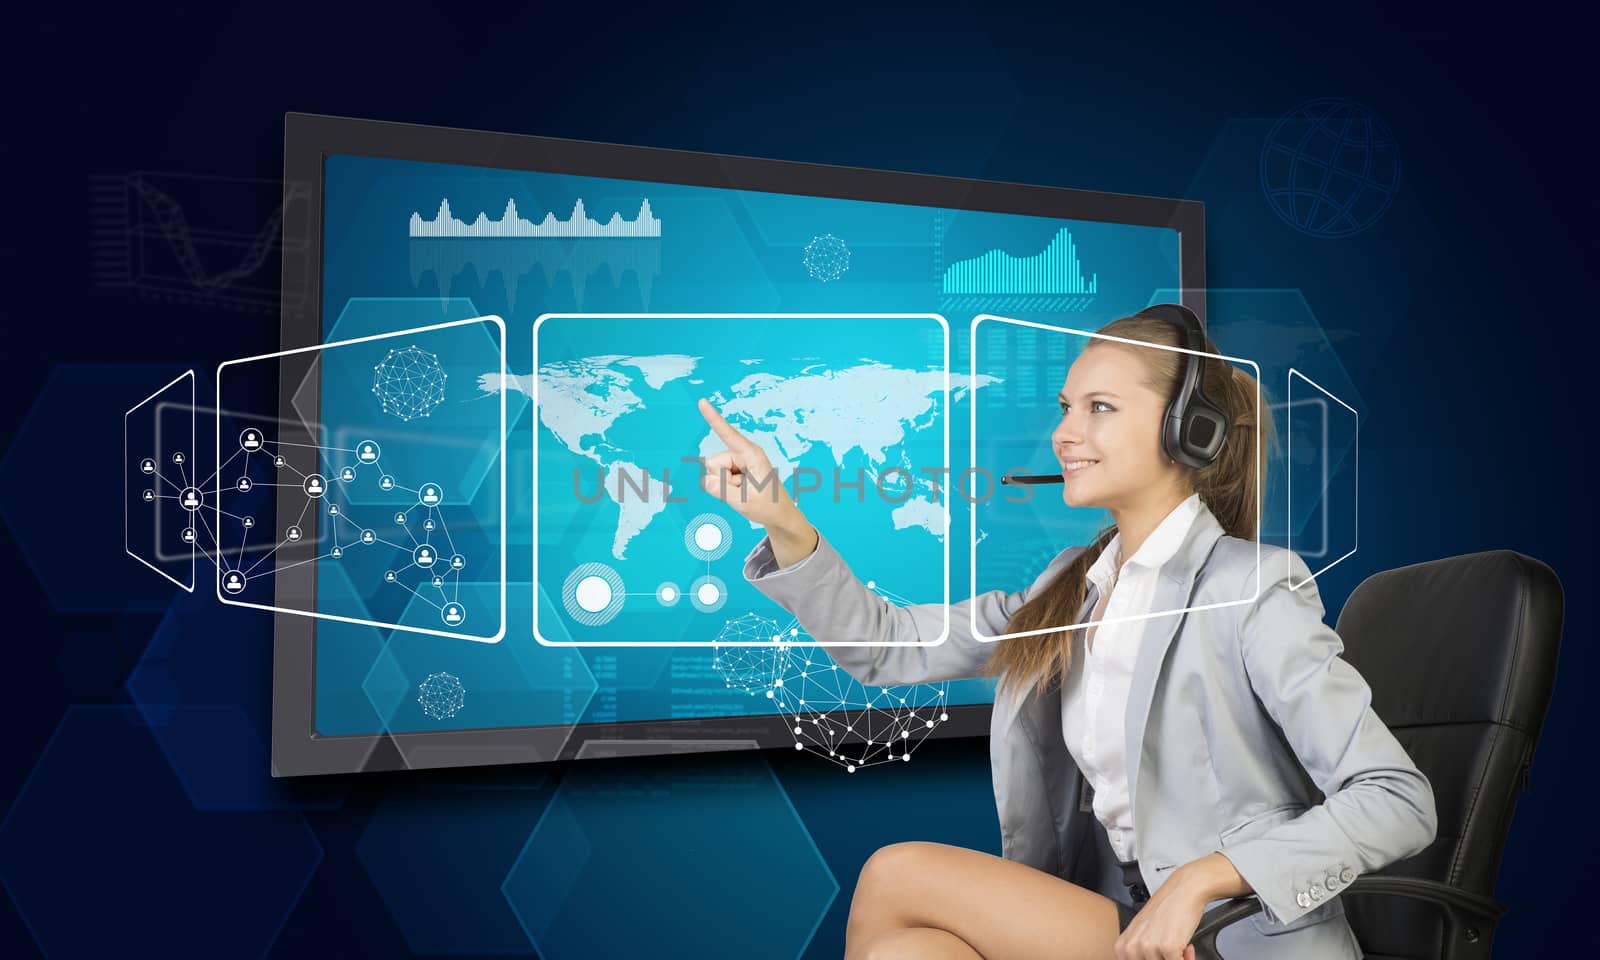 Businesswoman in headset using touch screen interface with world map, graphs and other elements, on blue background